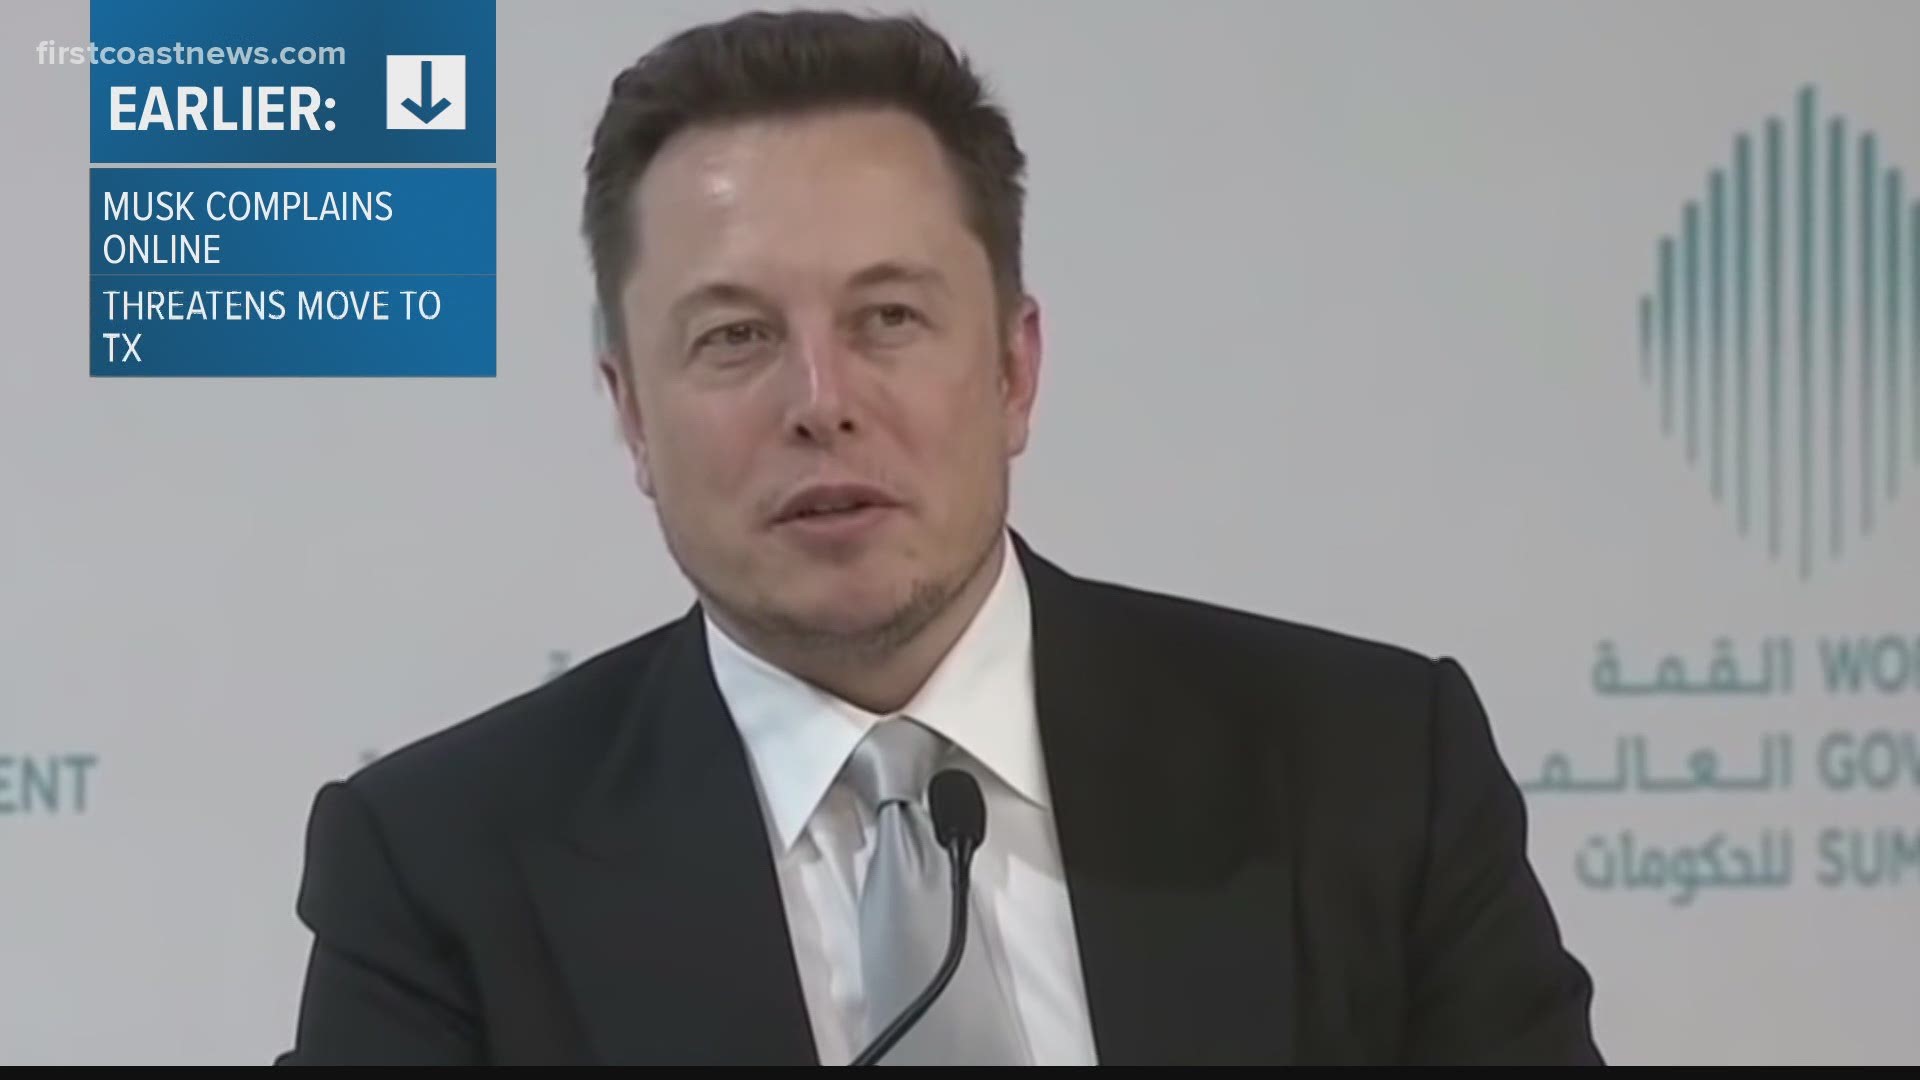 The St. Johns County Commission passed a resolution Tuesday asking Elon Musk to consider relocating there.